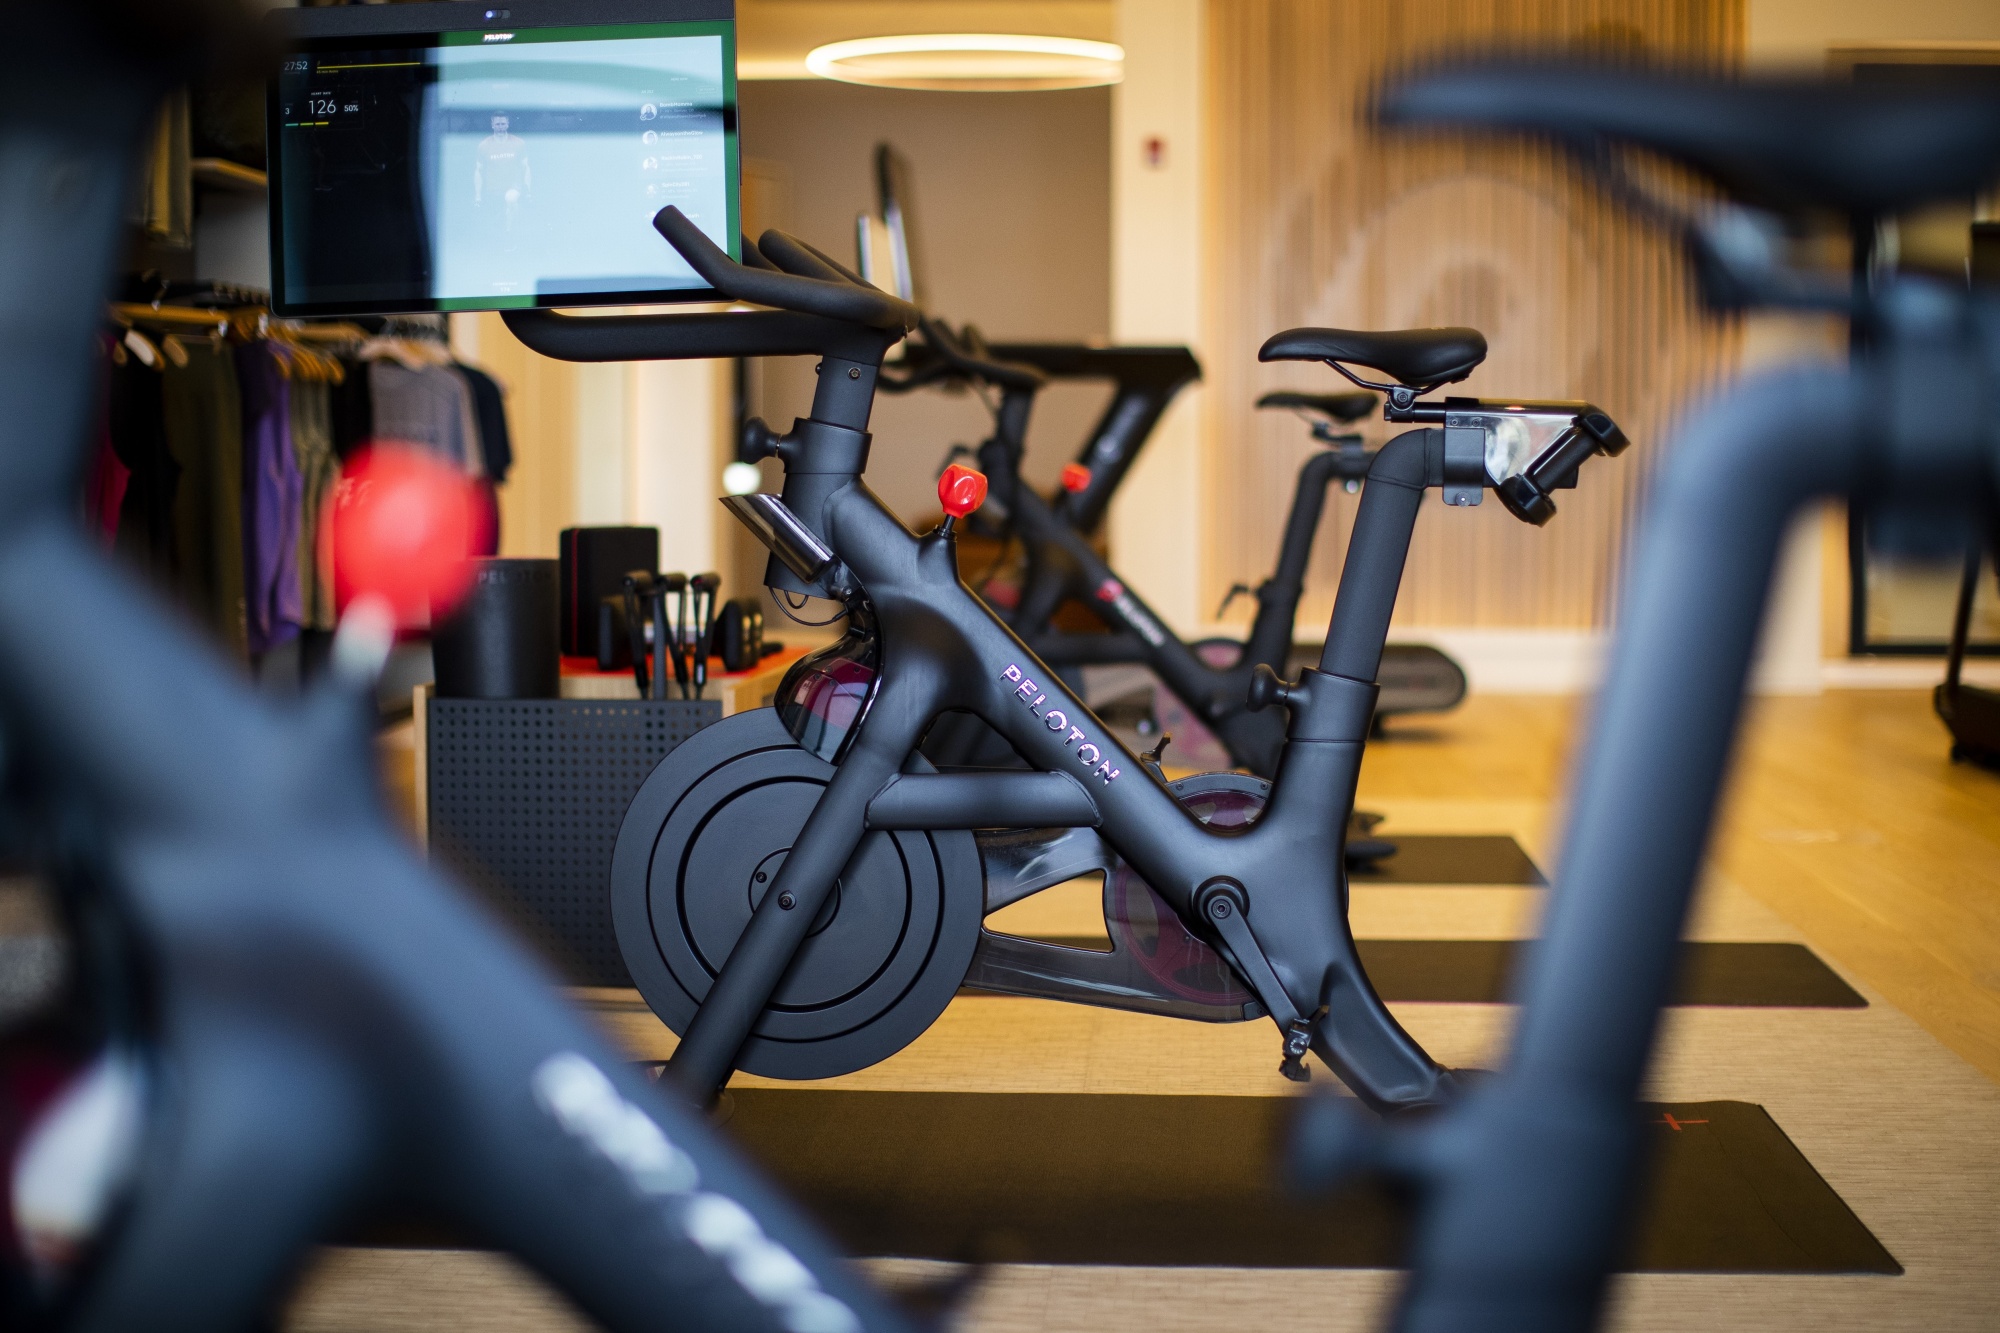 A Peloton stationary bike for sale at the company's showroom in Dedham, Mass.